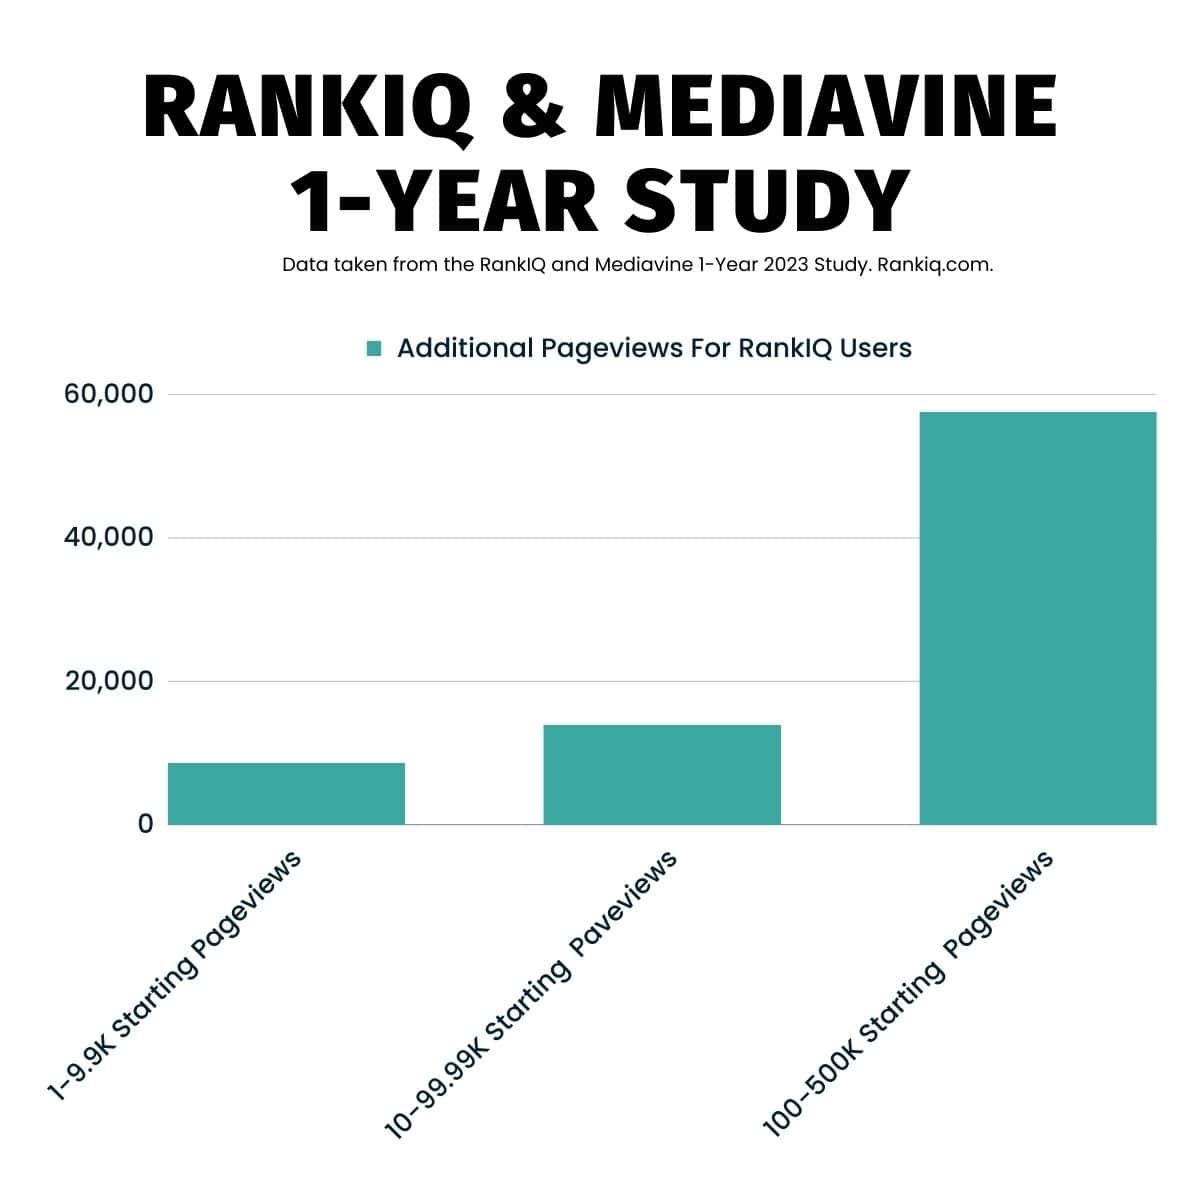 RankIQ & Mediavine 1-Year Study for Page view increases